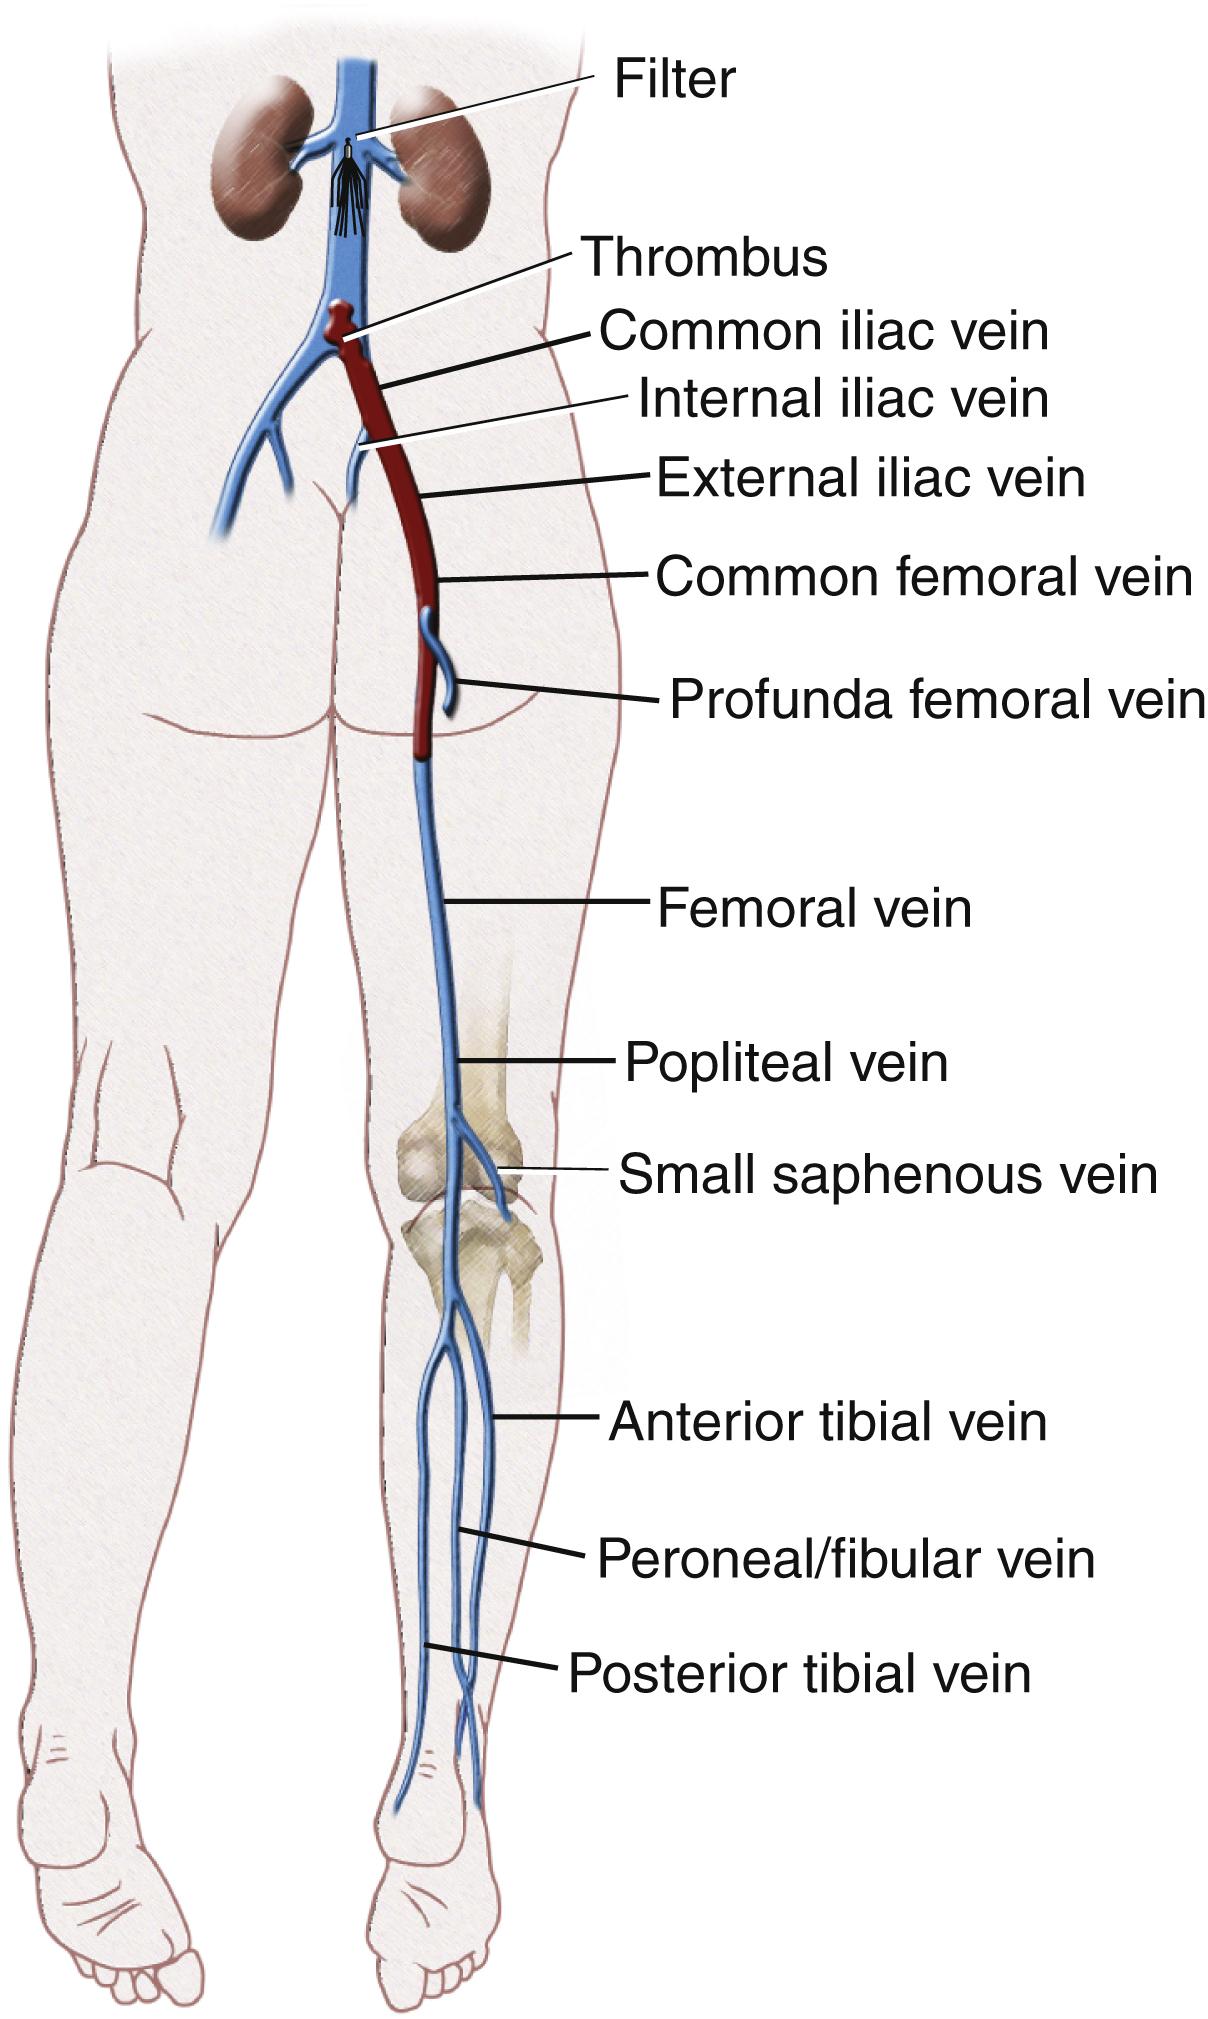 Fig. 70.1, Diagram of prone patient with thrombosis of right common iliac, external iliac, common femoral, and proximal veins. Thrombus extends into inferior vena cava as a “free-floating” thrombus. A filter has been placed infrarenally.